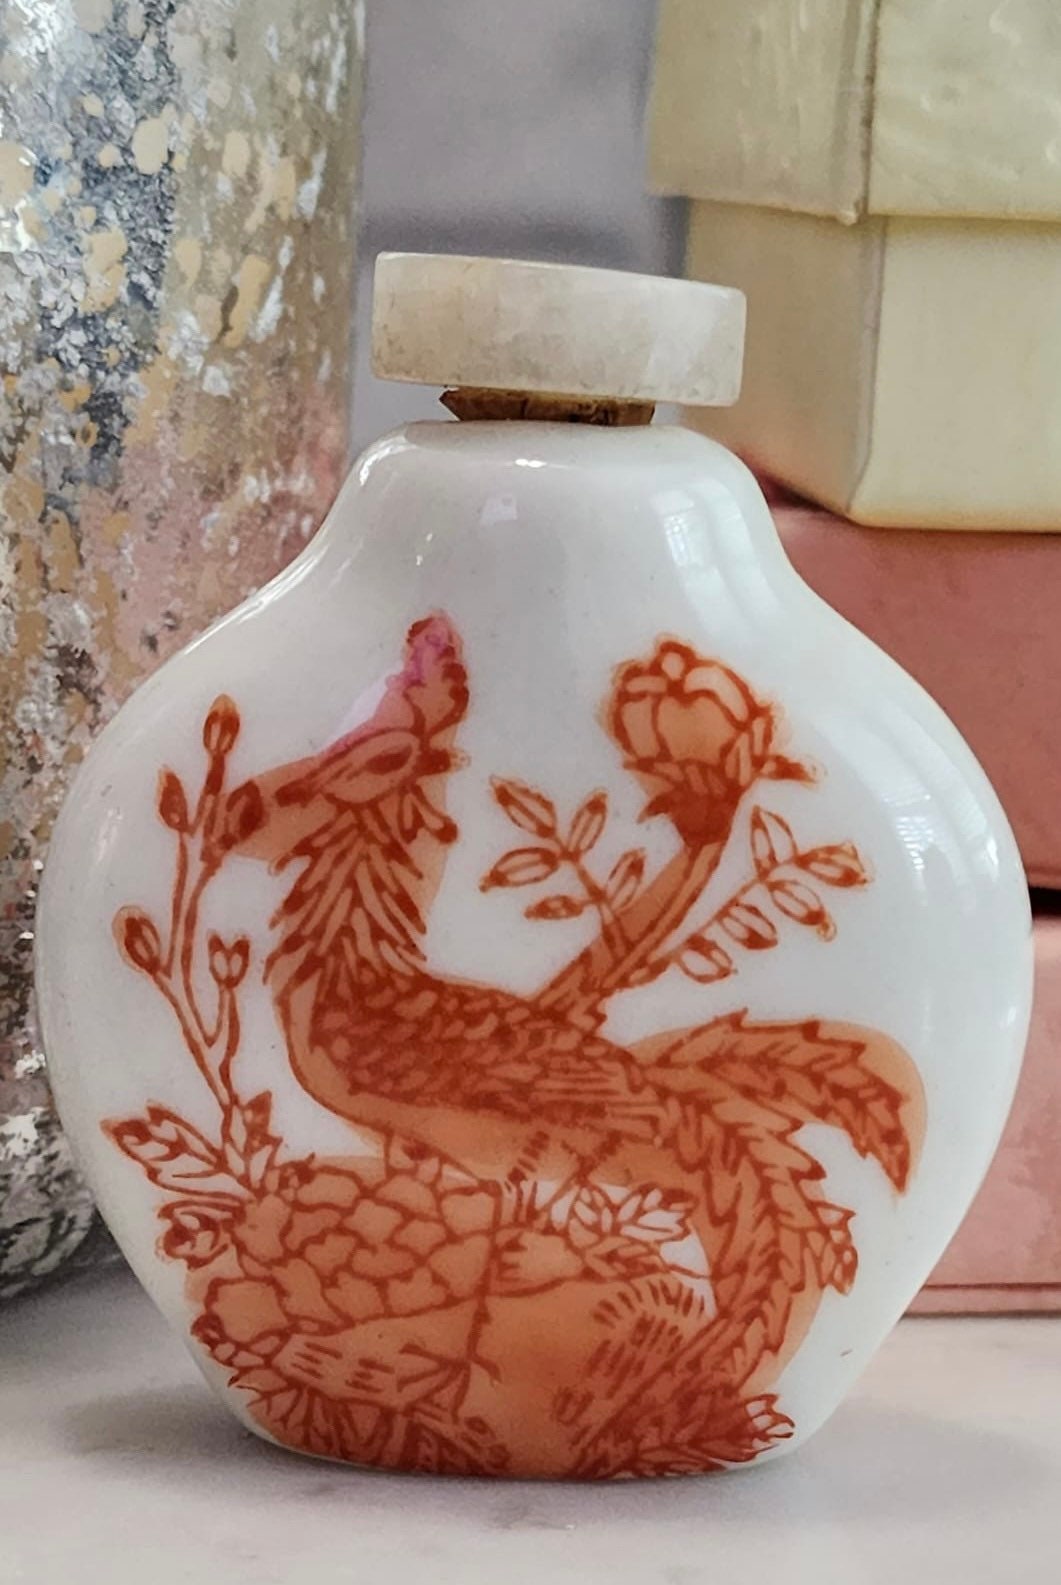 Vintage Collectible Hand Made Chinese Yixing Zisha Snuff Bottle,hand-painted  Double-sided Purple Clay Flower Bird Snuff Tobacco Scent Bottle 